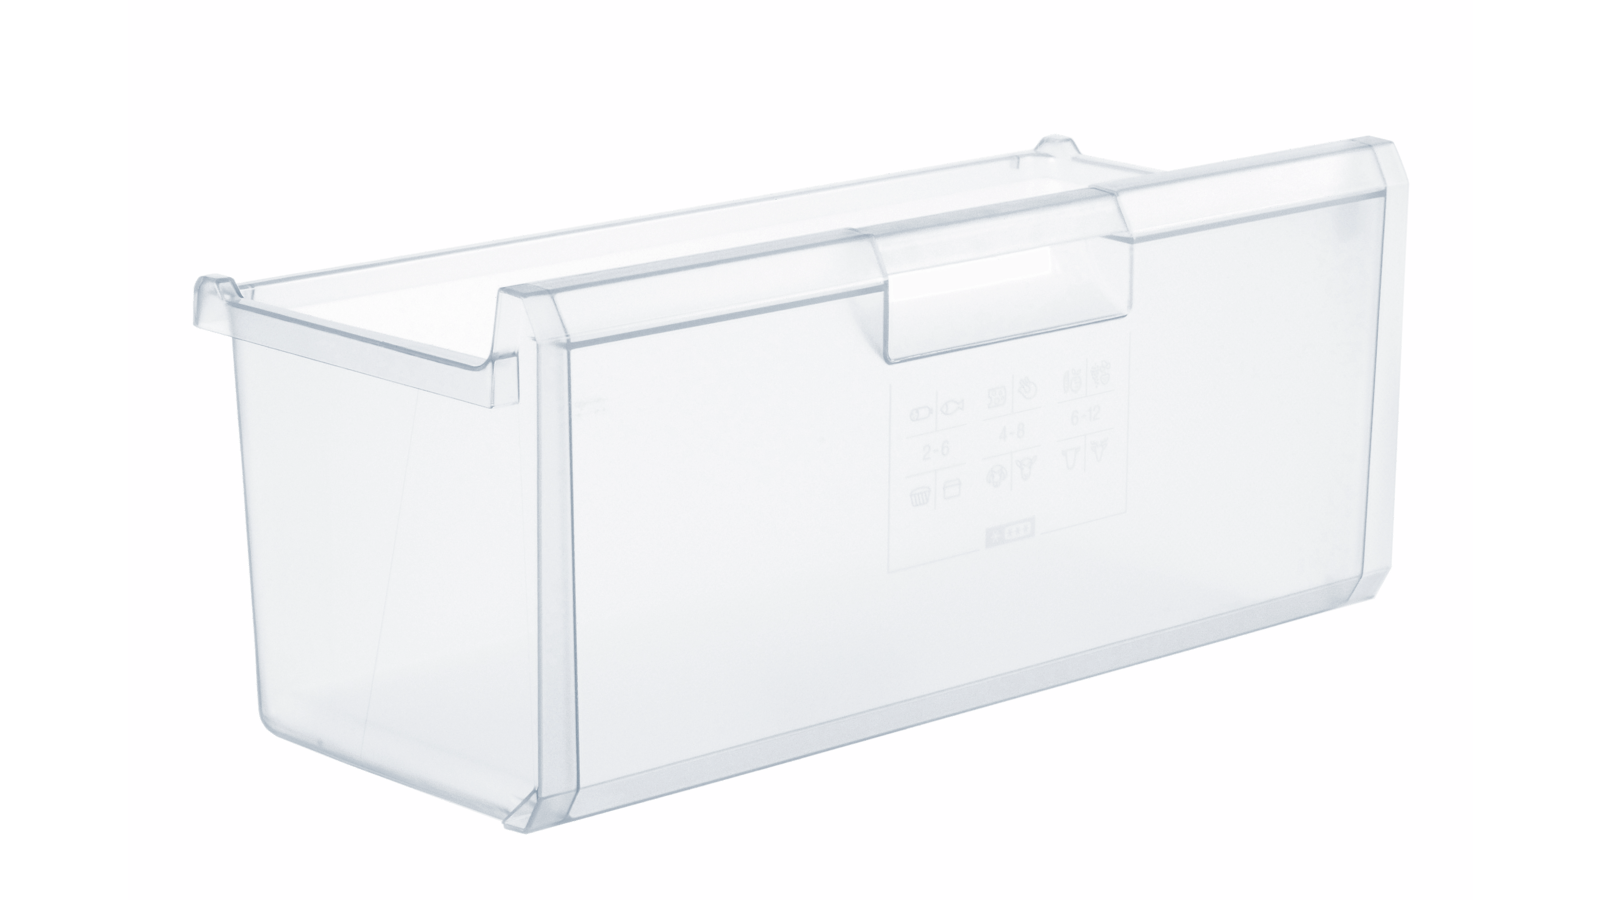 Food Container Tall Bosch 00471196 for Refrigerator